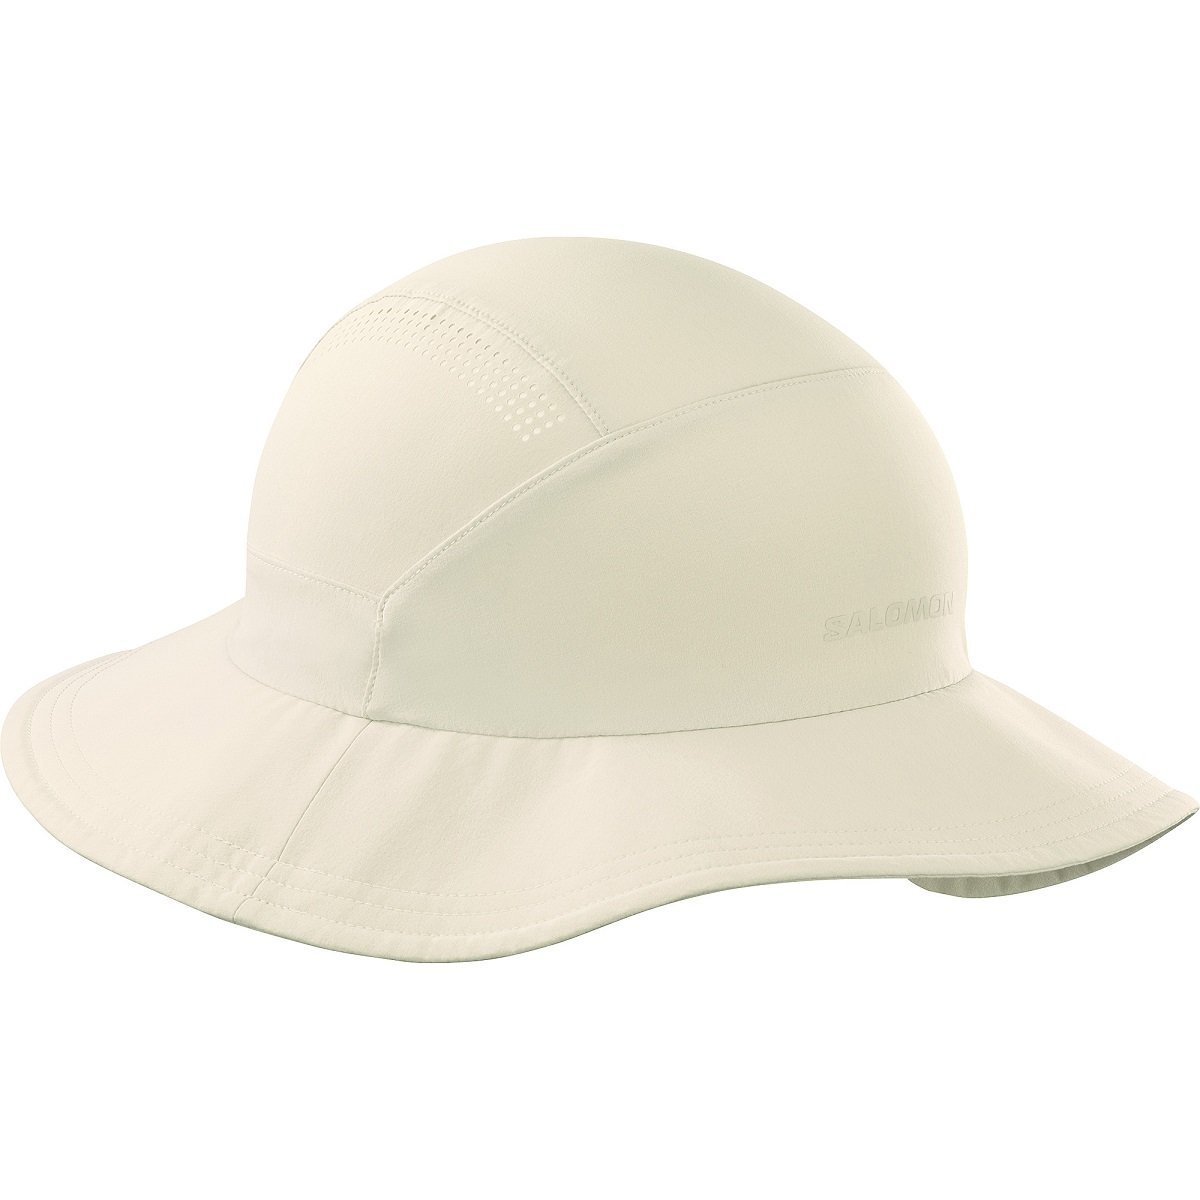 LC2237900_0_GHO_mountainhat_rainyday_headwear_u.png.high-res